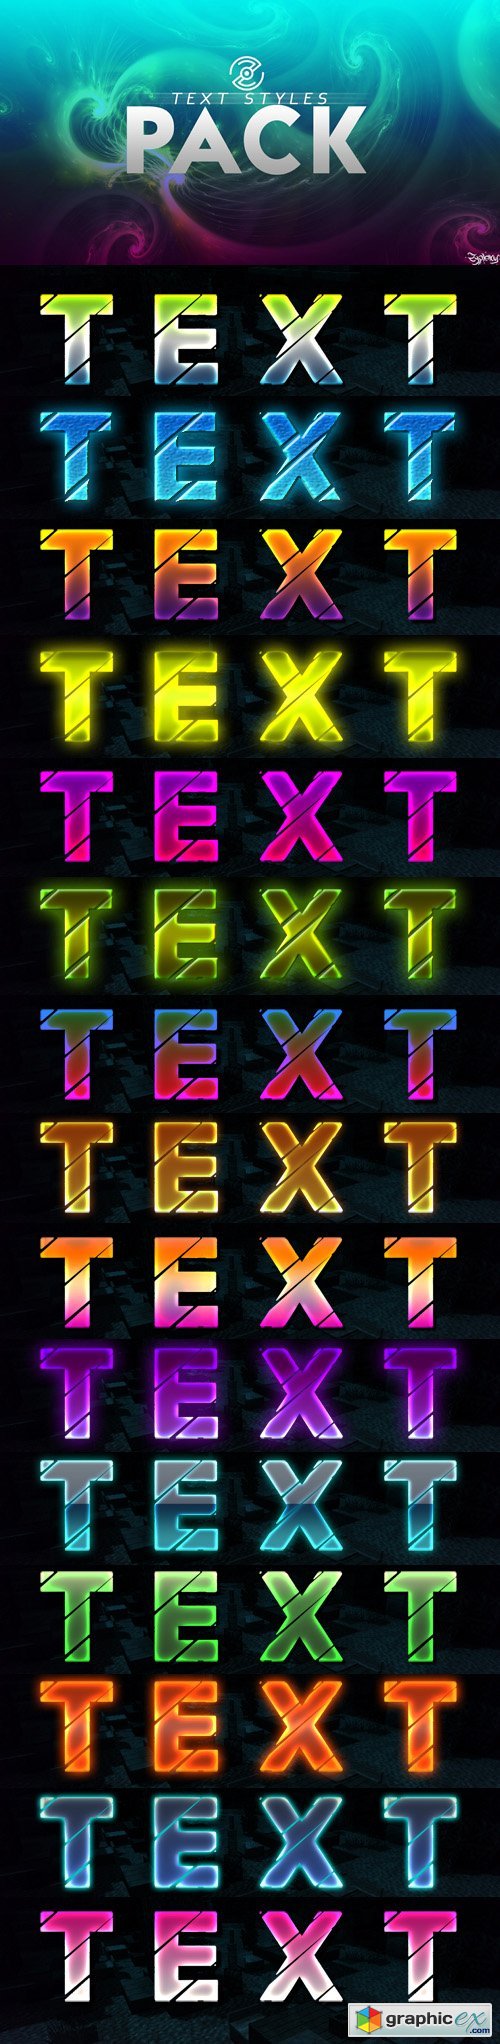 15 Text Styles Pack for Photoshop